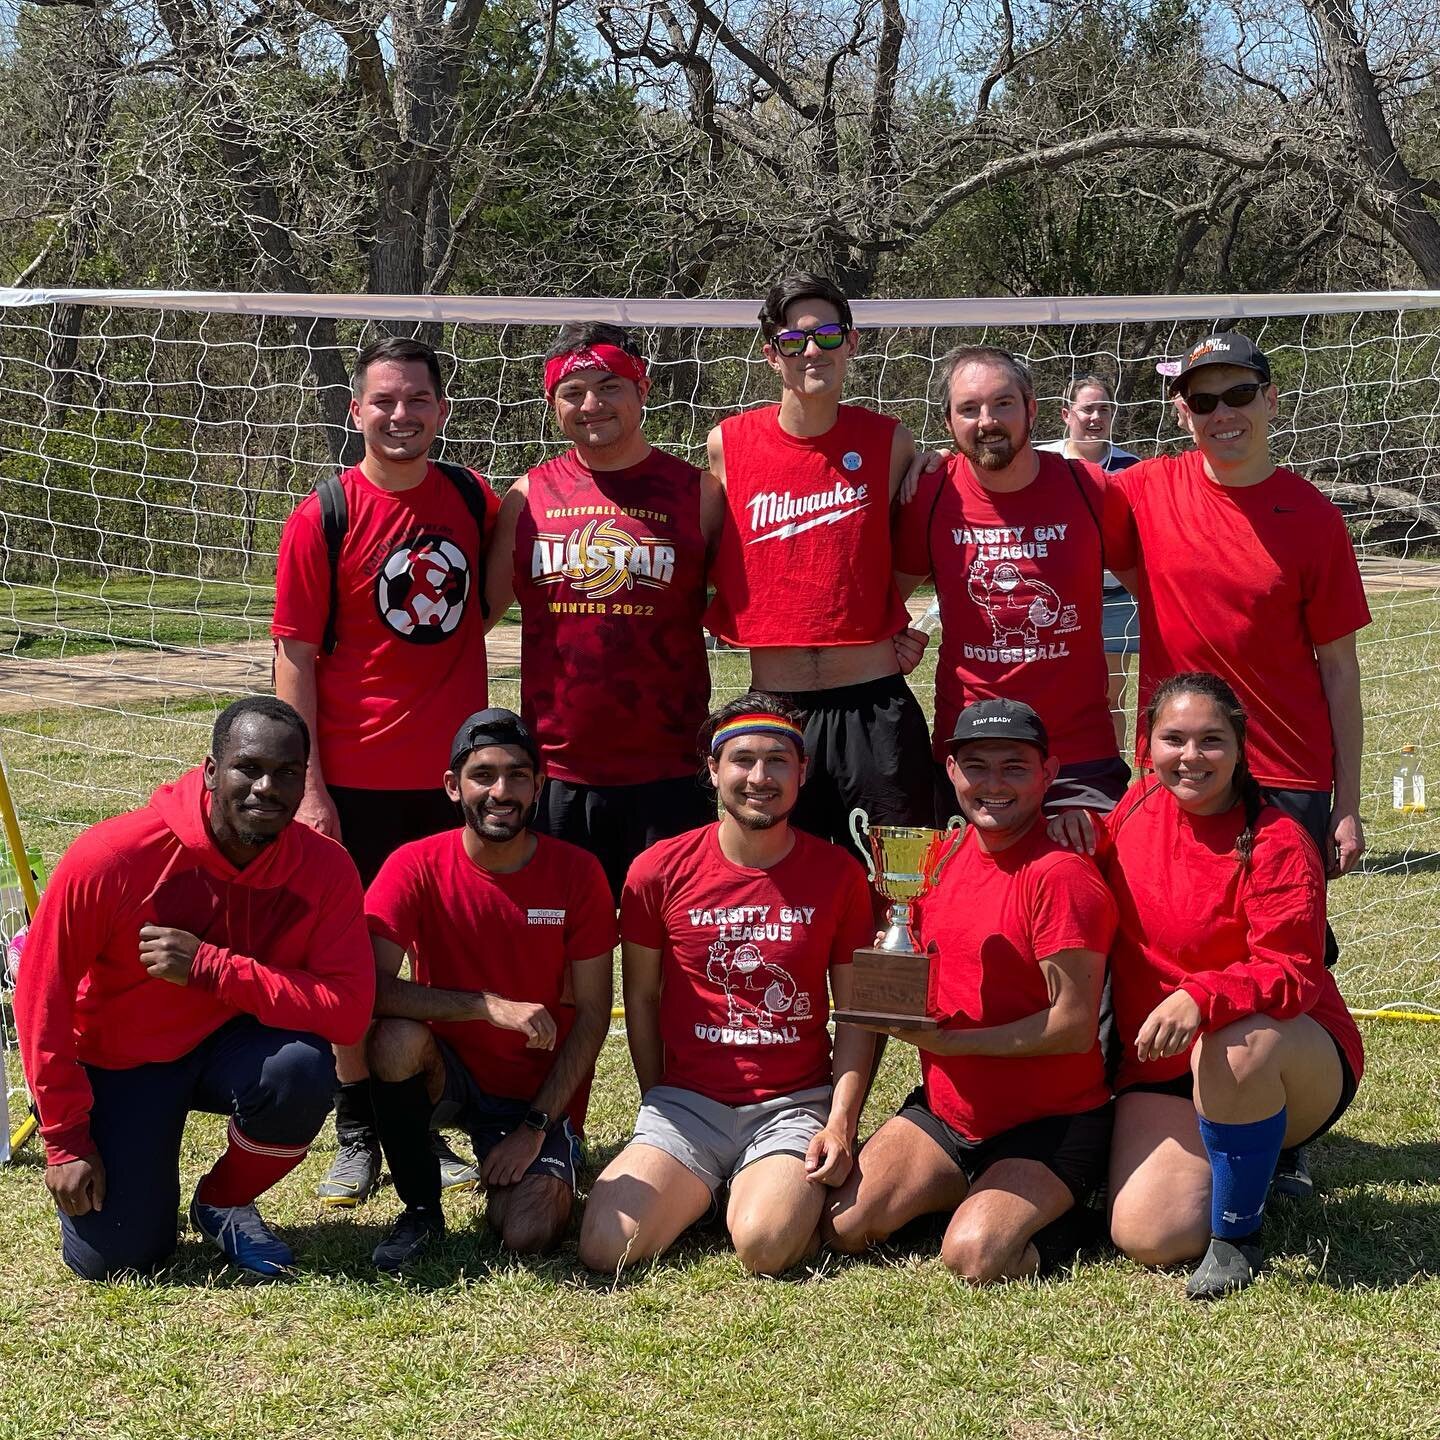 Fuego is back and ready to go for the next season of soccer! ⚽️ Last month they won the inaugural season of VGL Austin soccer, will they win it again? 

It&rsquo;s a regualr and FULL 8 WEEK season! 

Saturday&rsquo;s (games start at 10am)
Round Robin